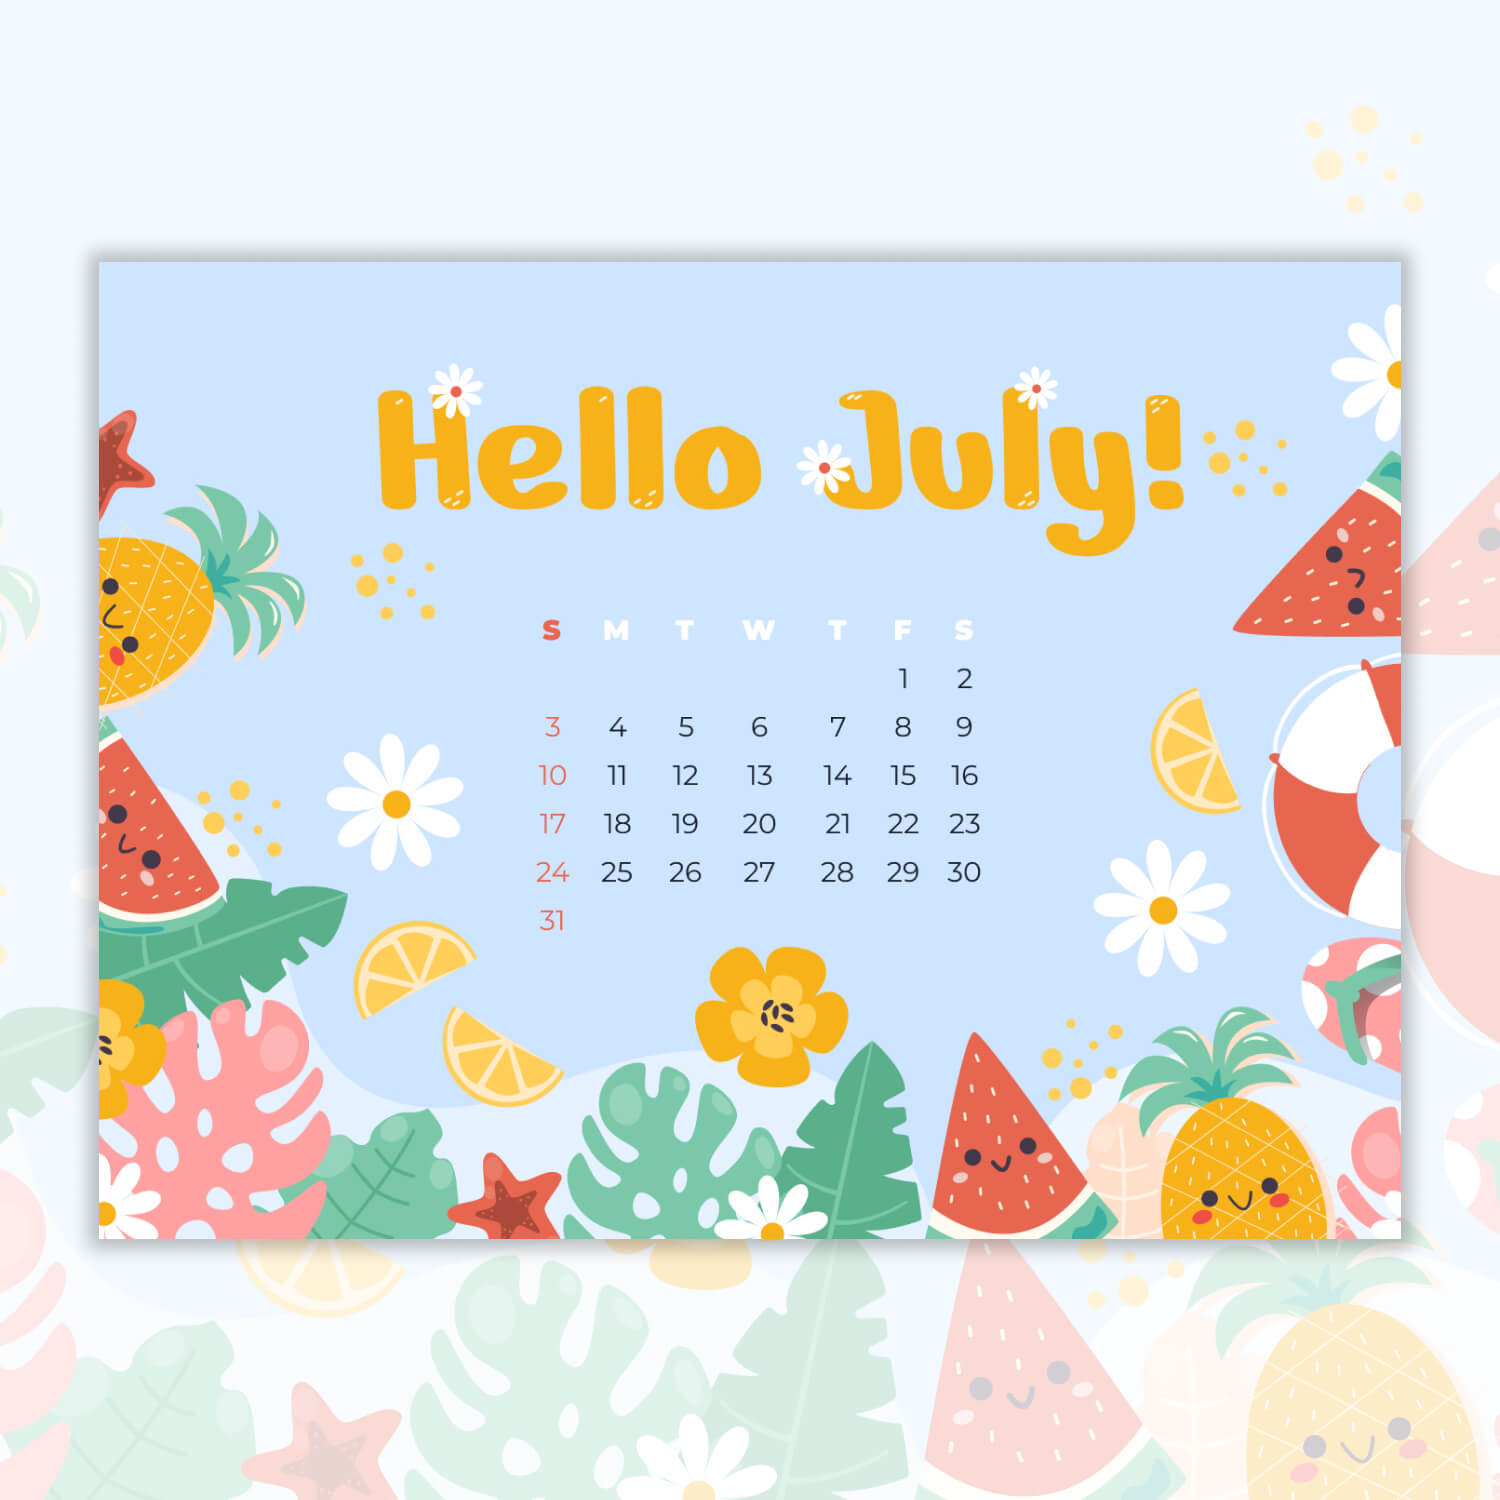 Free July Fruits Calendar cover image.